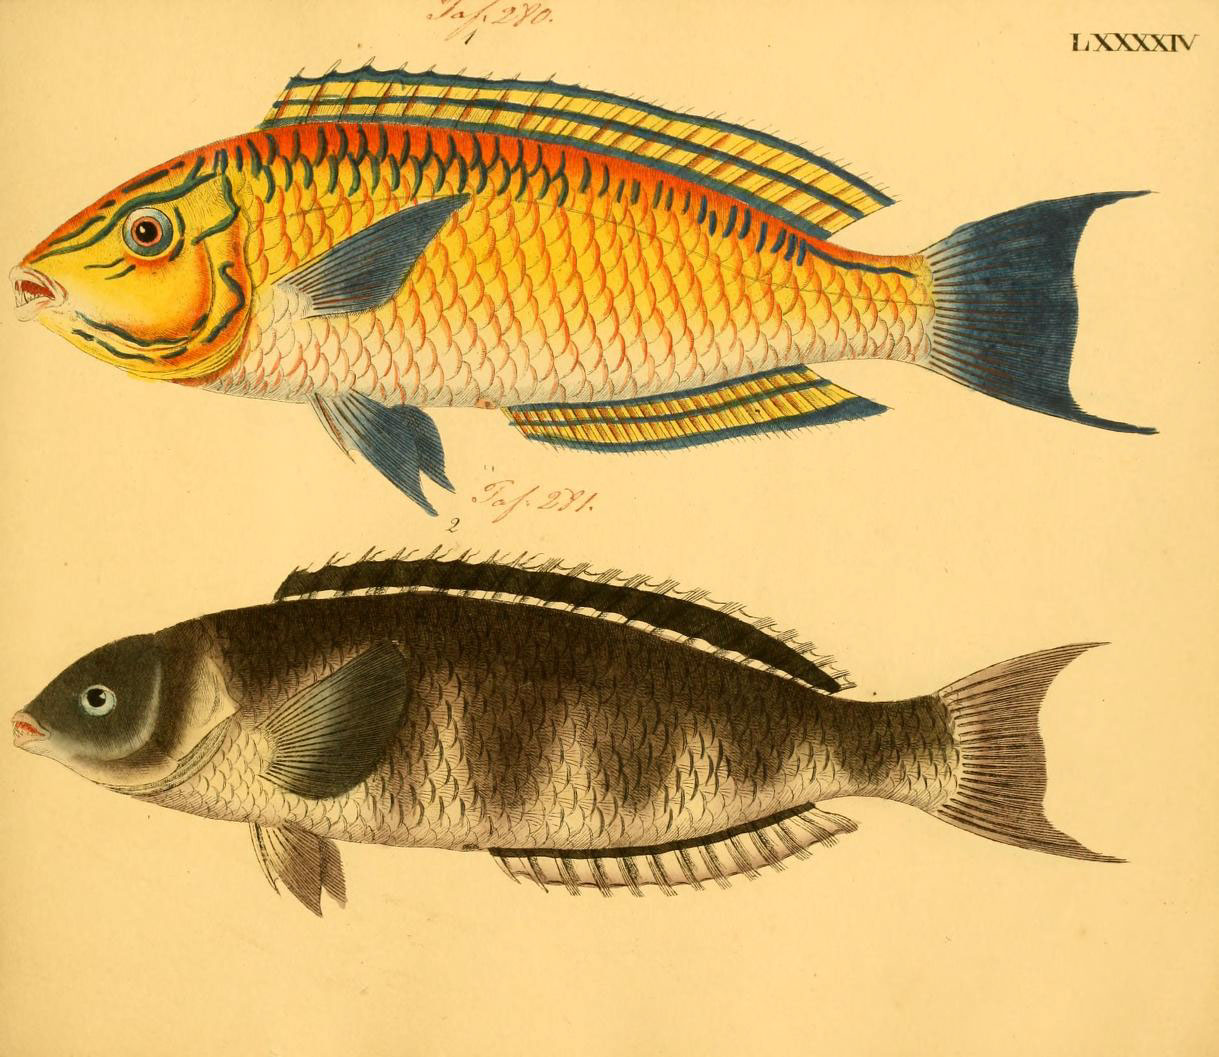 two fish side by side with different colored body shapes